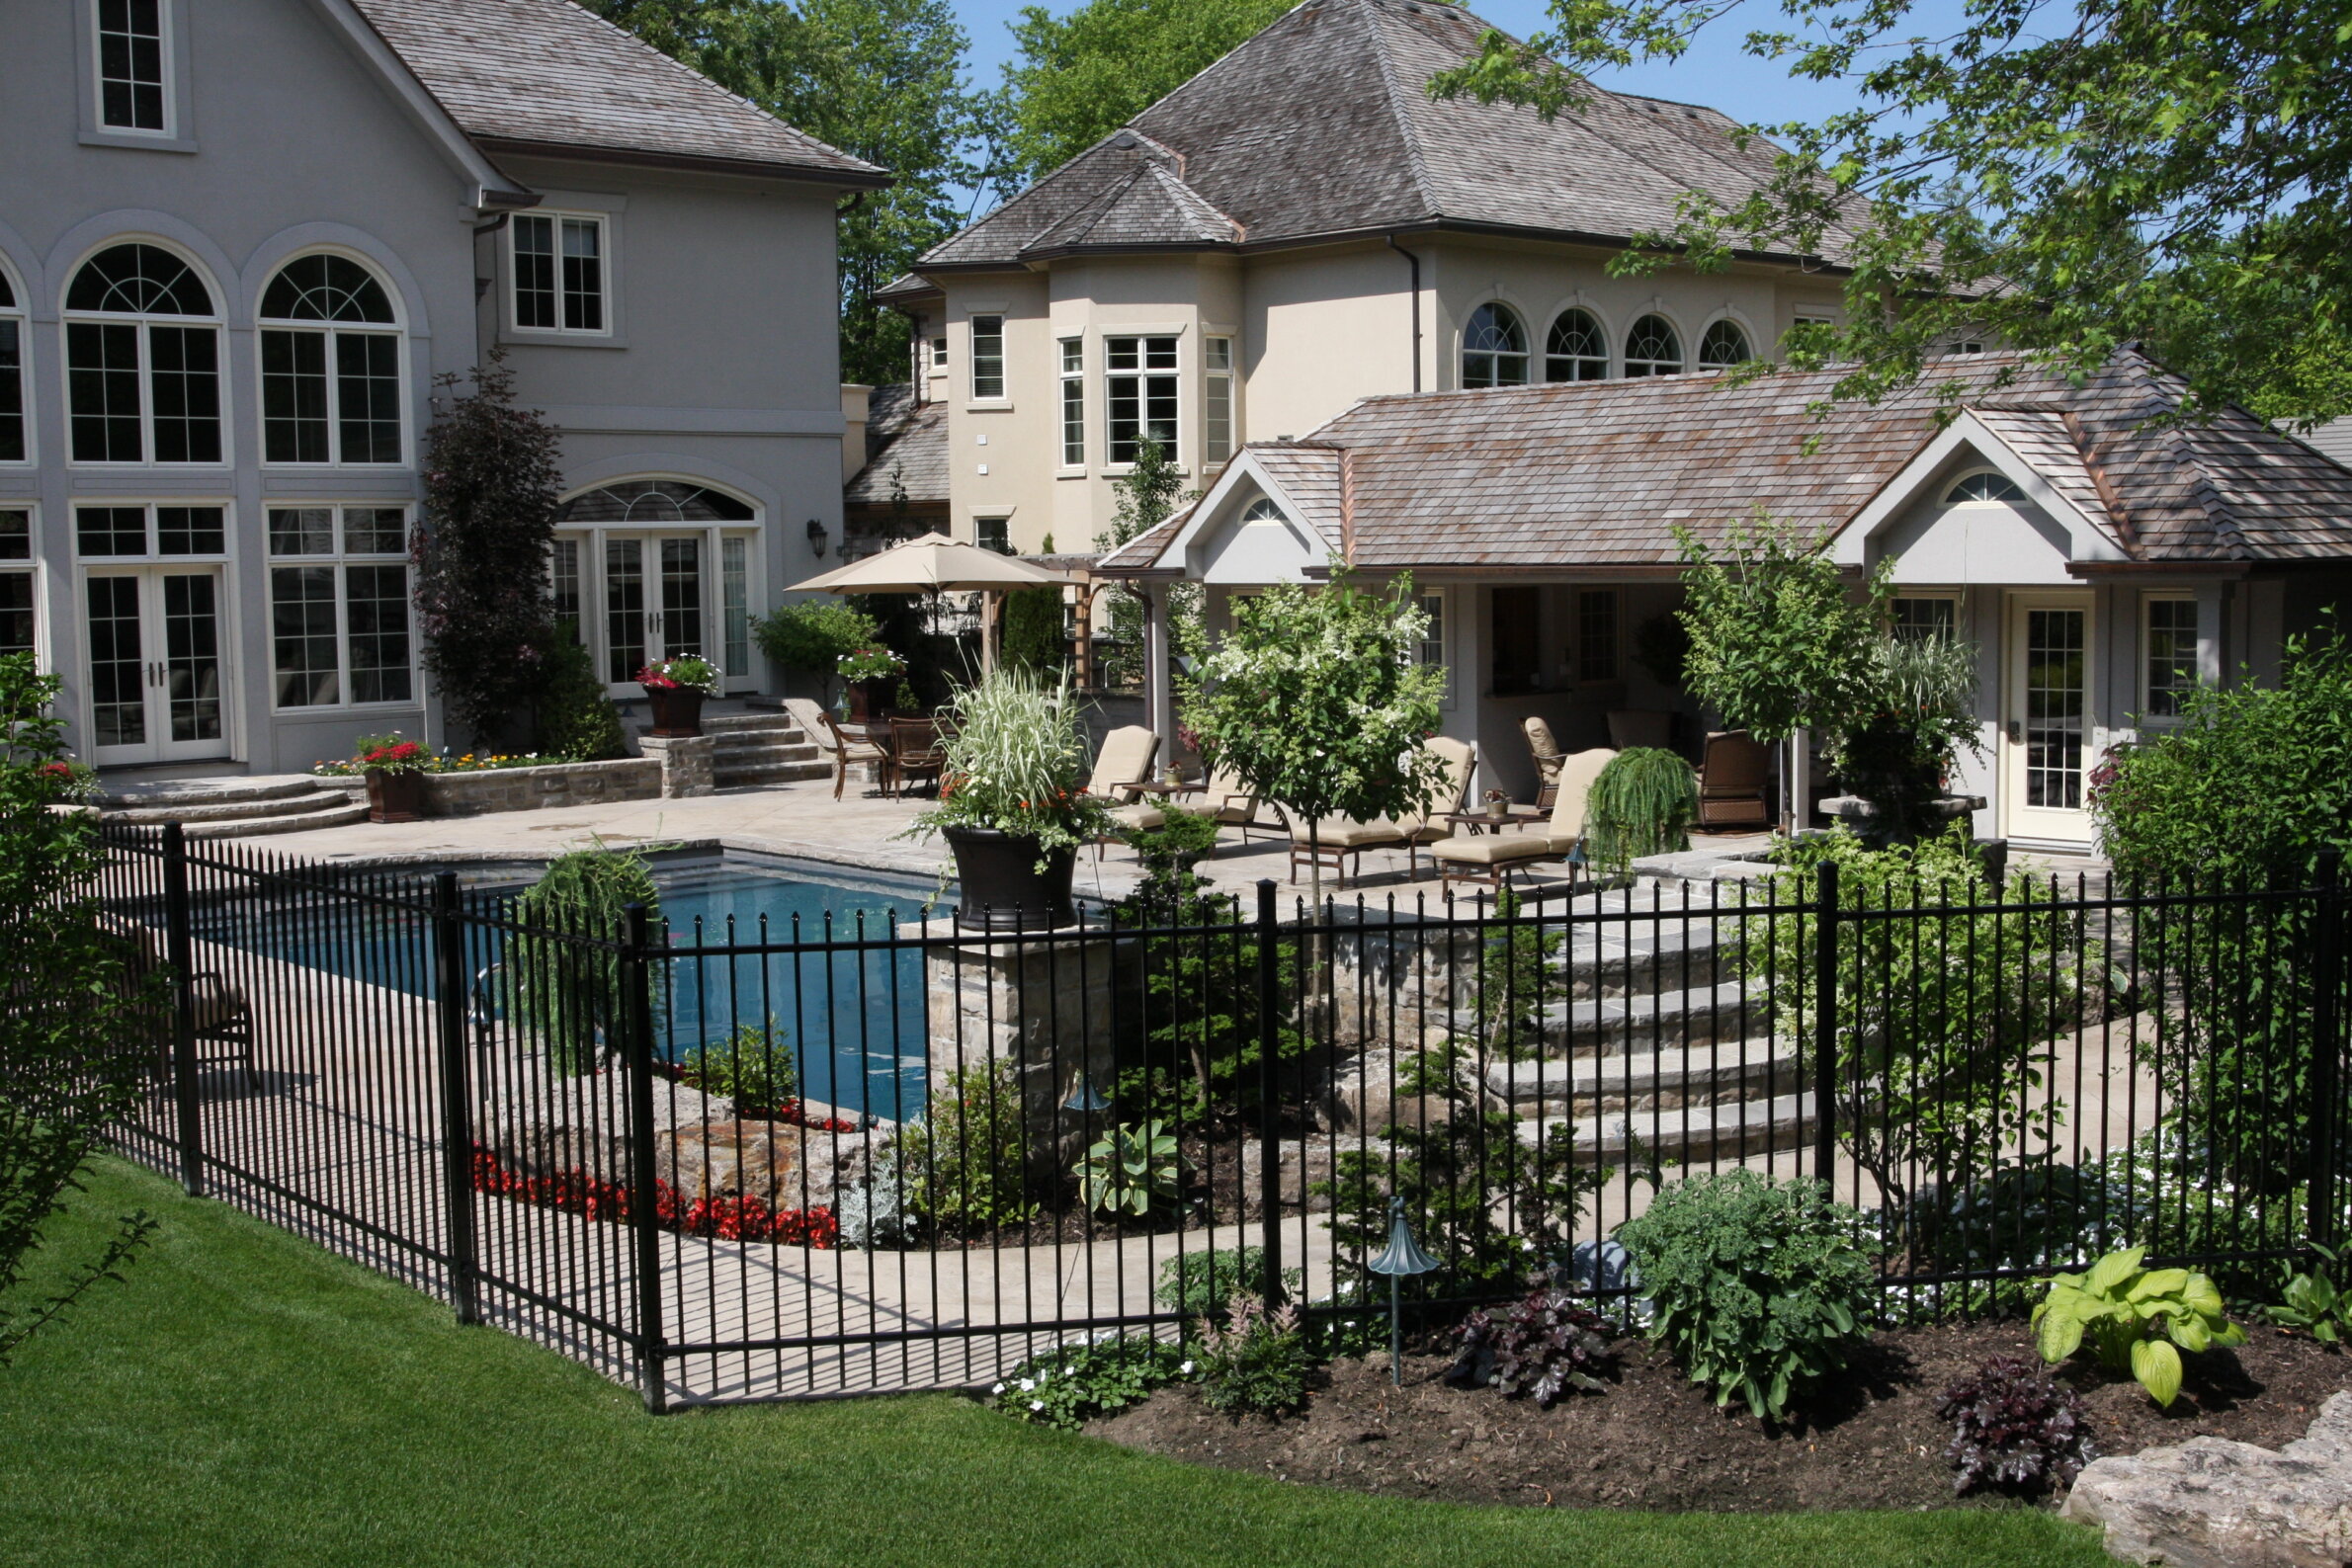 An upscale backyard with a swimming pool, neatly manicured lawn, patio furniture, and a grand house featuring large windows and multiple rooflines.